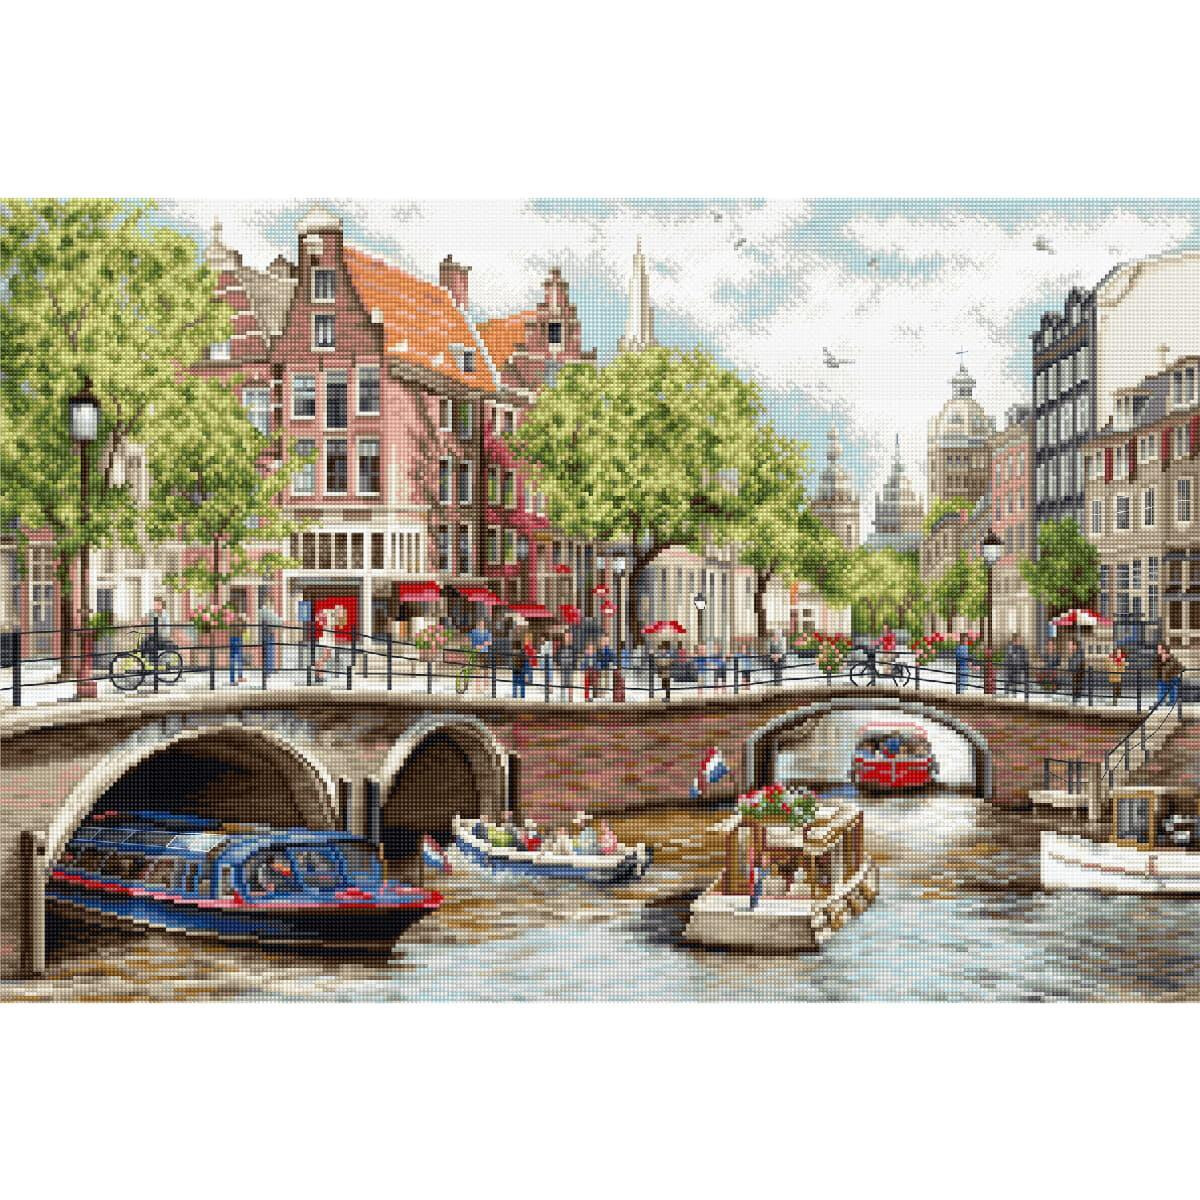 A lively canal scene in Amsterdam shows picturesque...